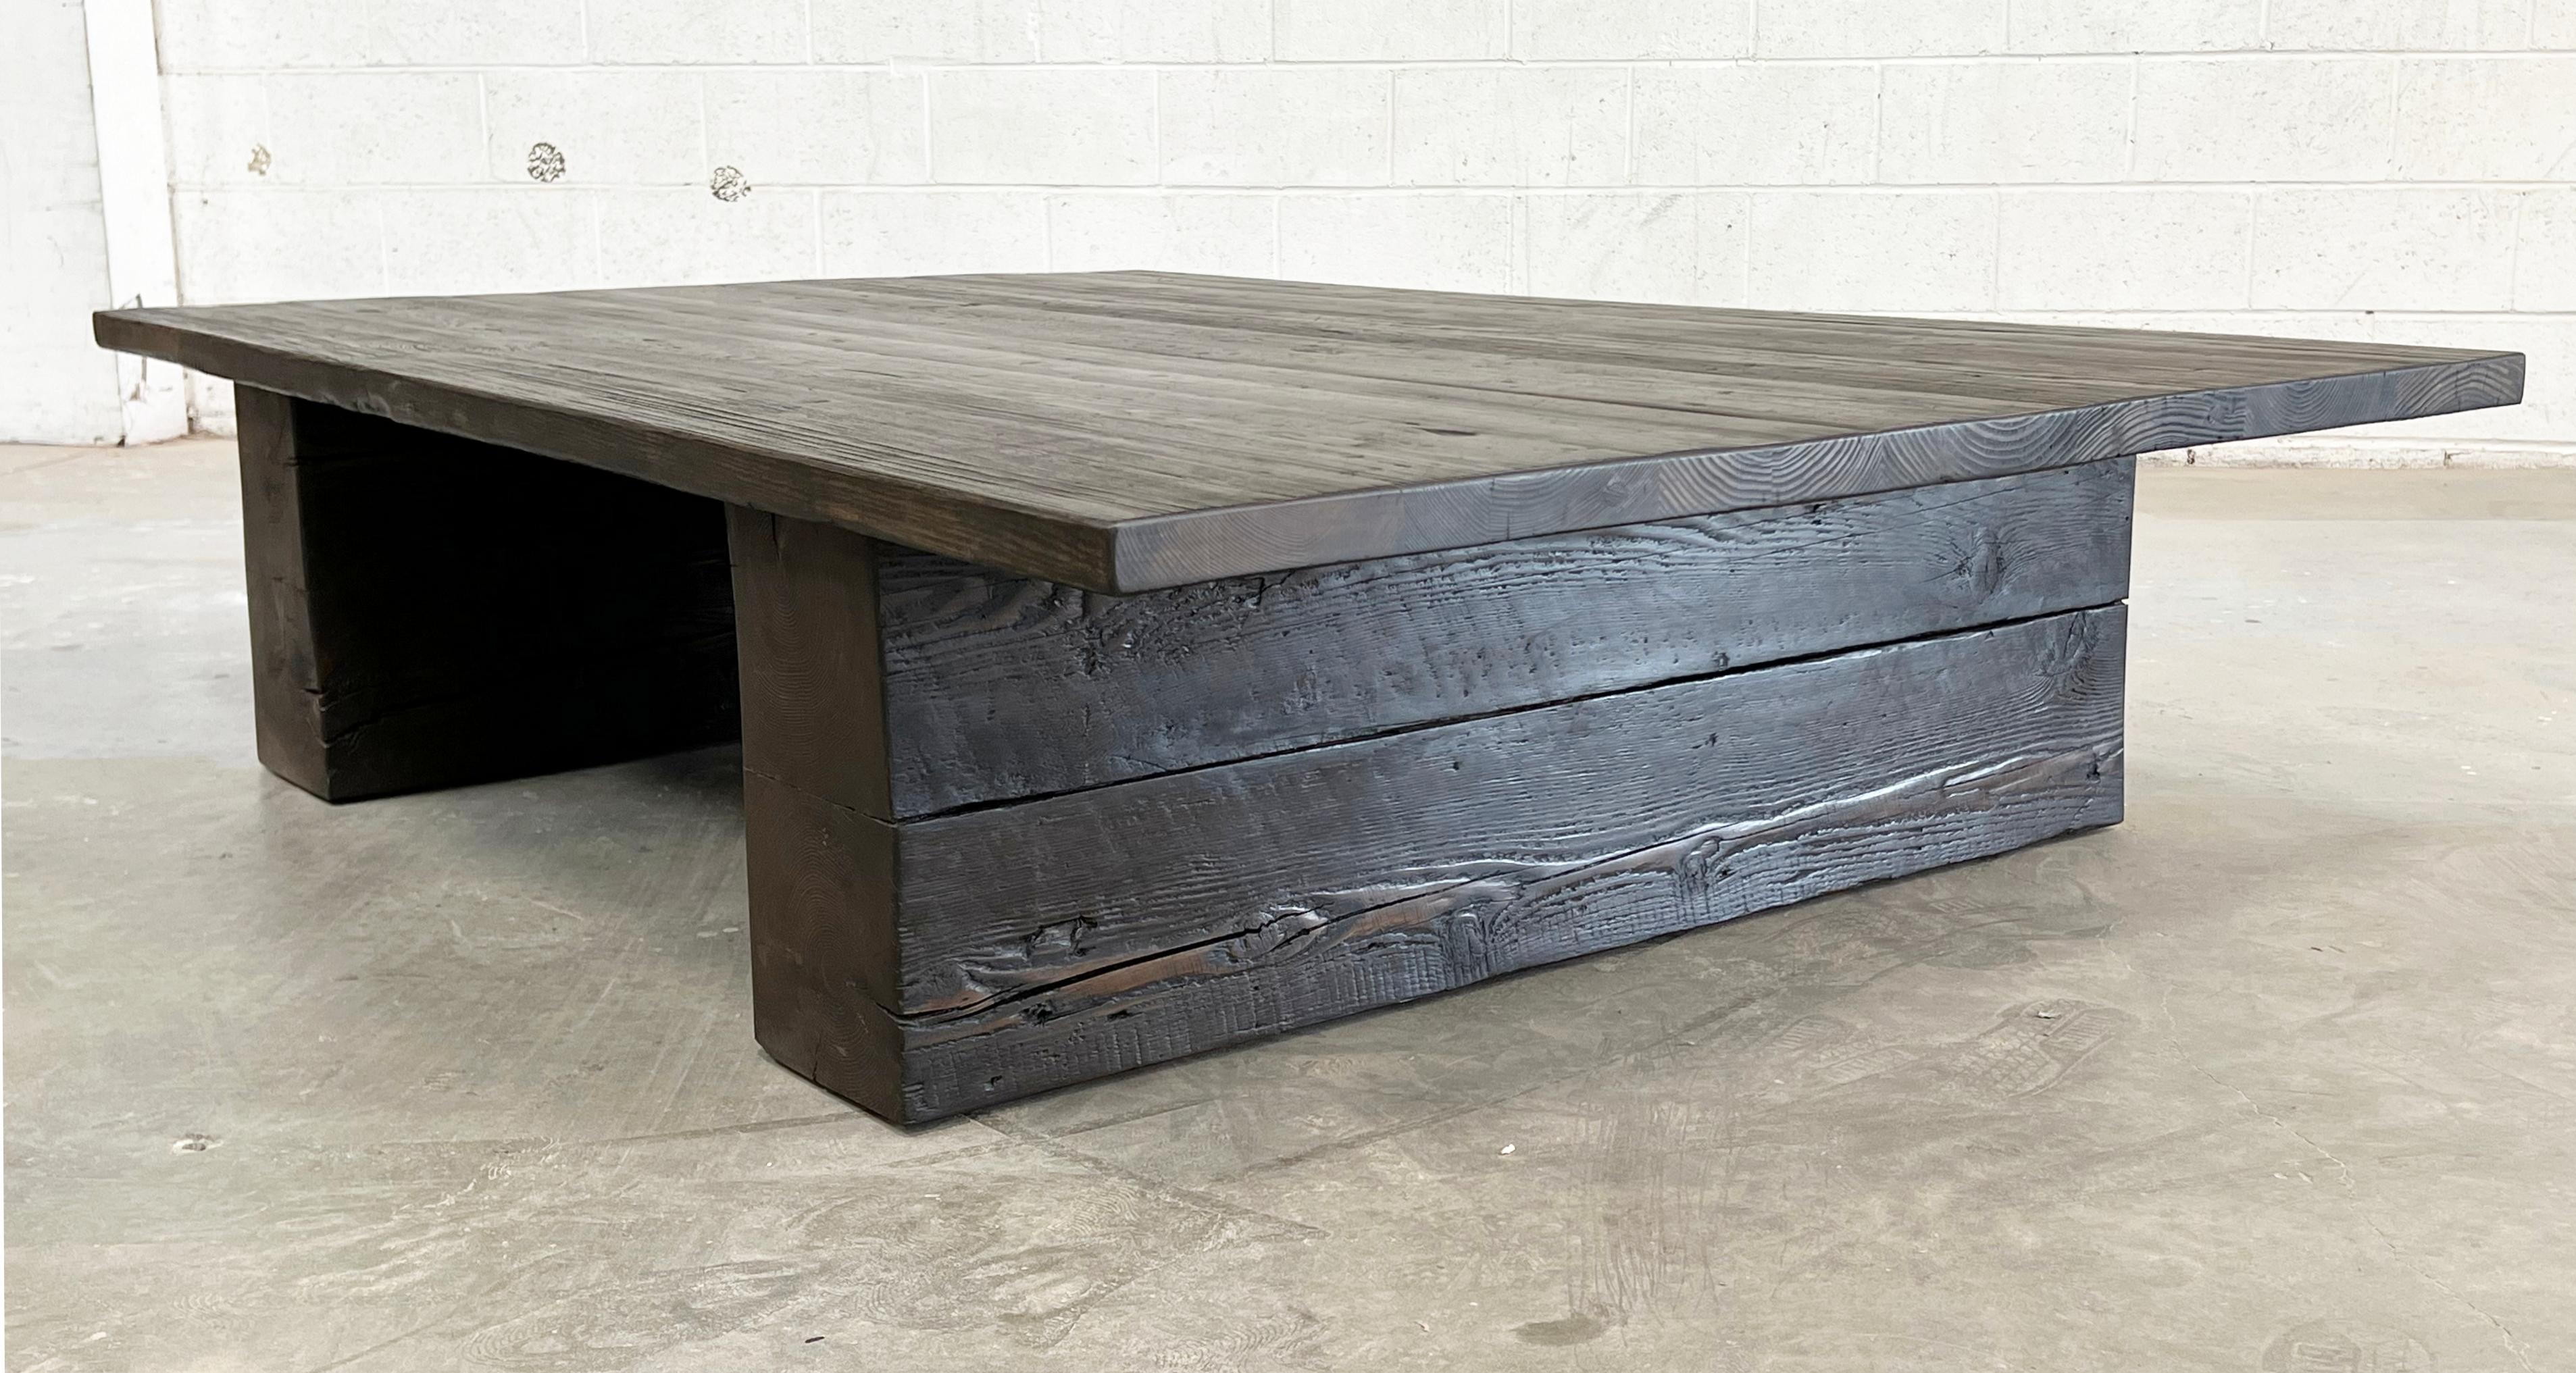 Primitive Block Leg Coffee Table Made from Oak and Reclaimed Pine